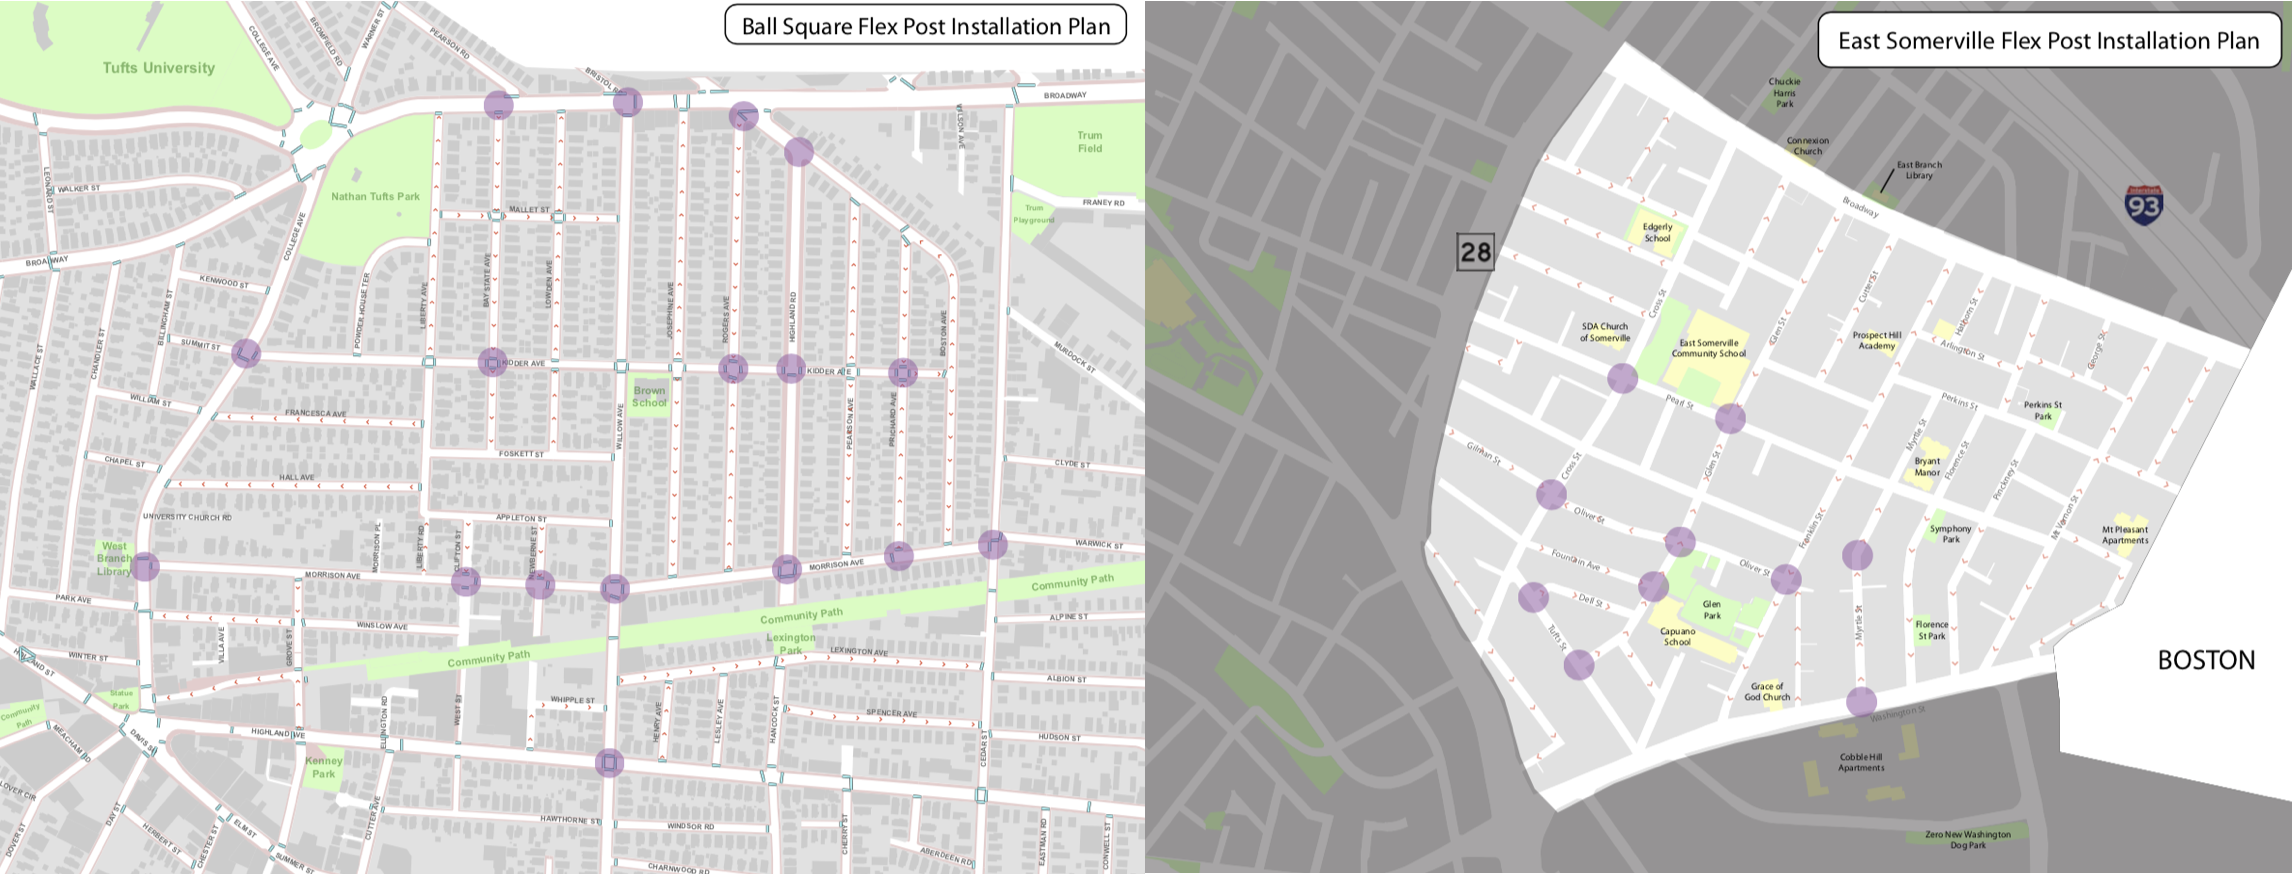 Map of flex posts installed in East Somerville and Ball Sq.